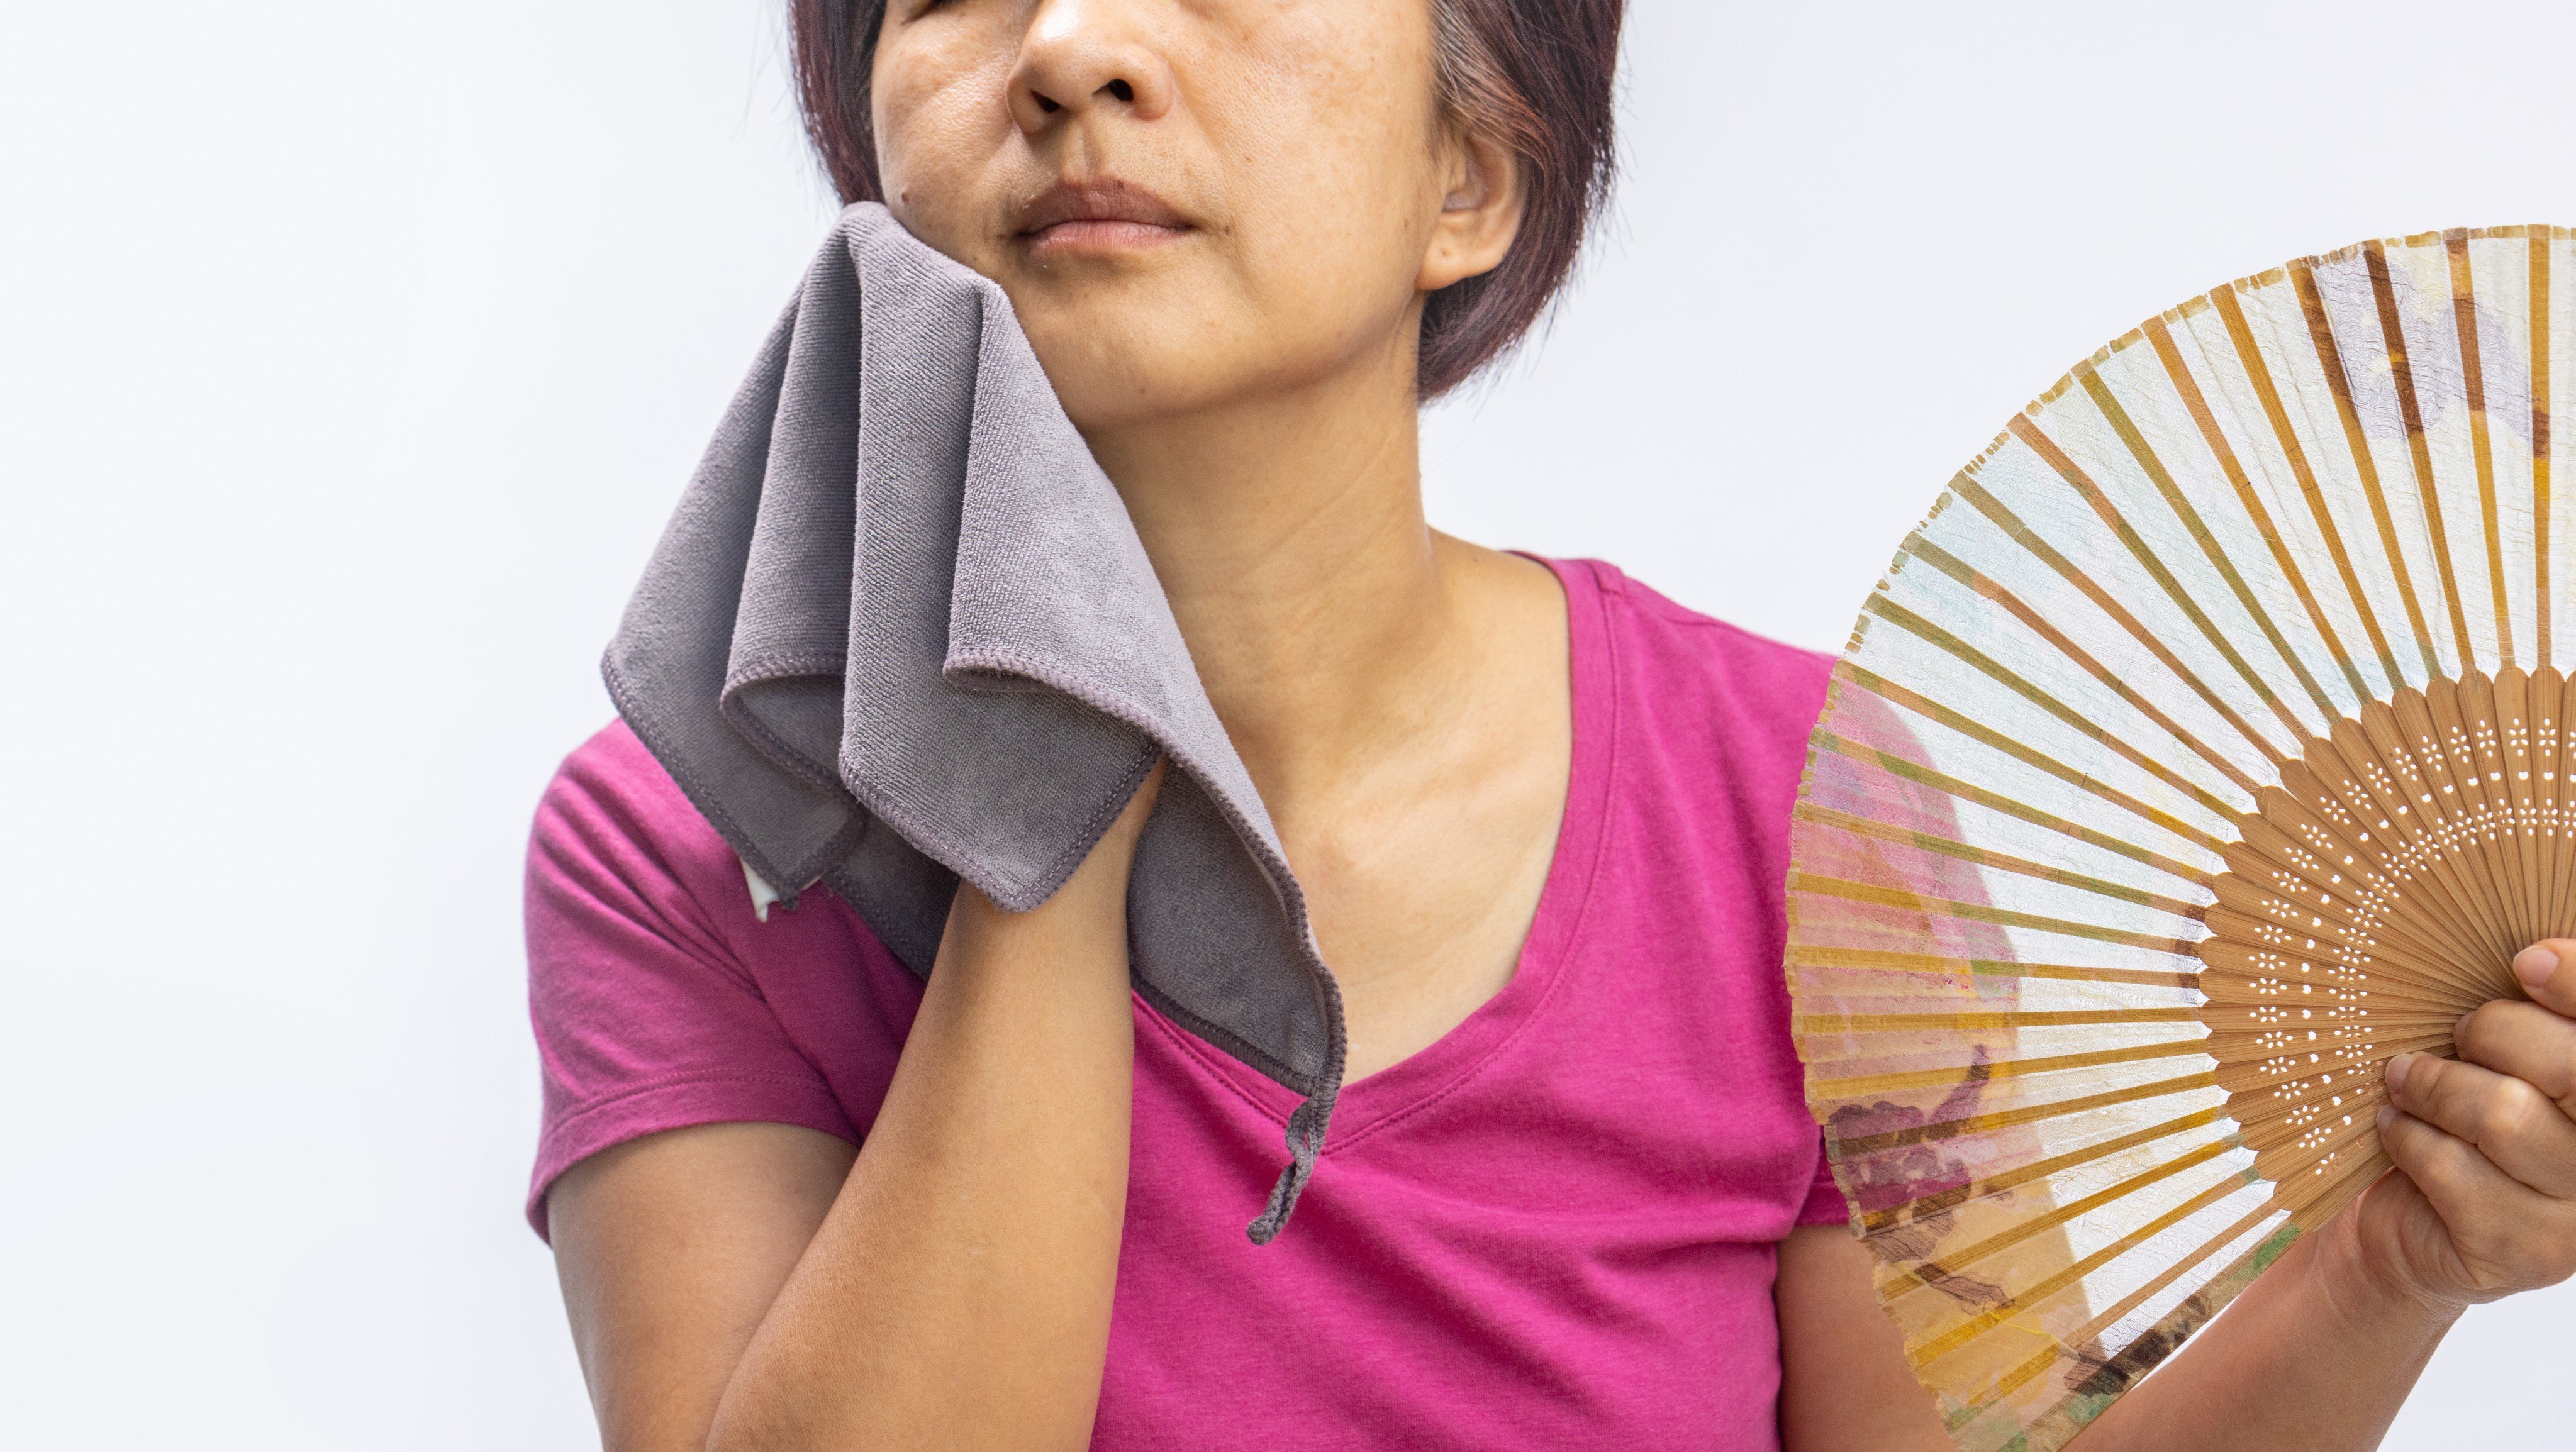 Hot flushes linked to menopause can cause significant anxiety in women. A new app that harnesses the power of hypnotherapy has been developed to help women track and manage hot flushes and other symptoms associated with menopause. Photo: Shutterstock